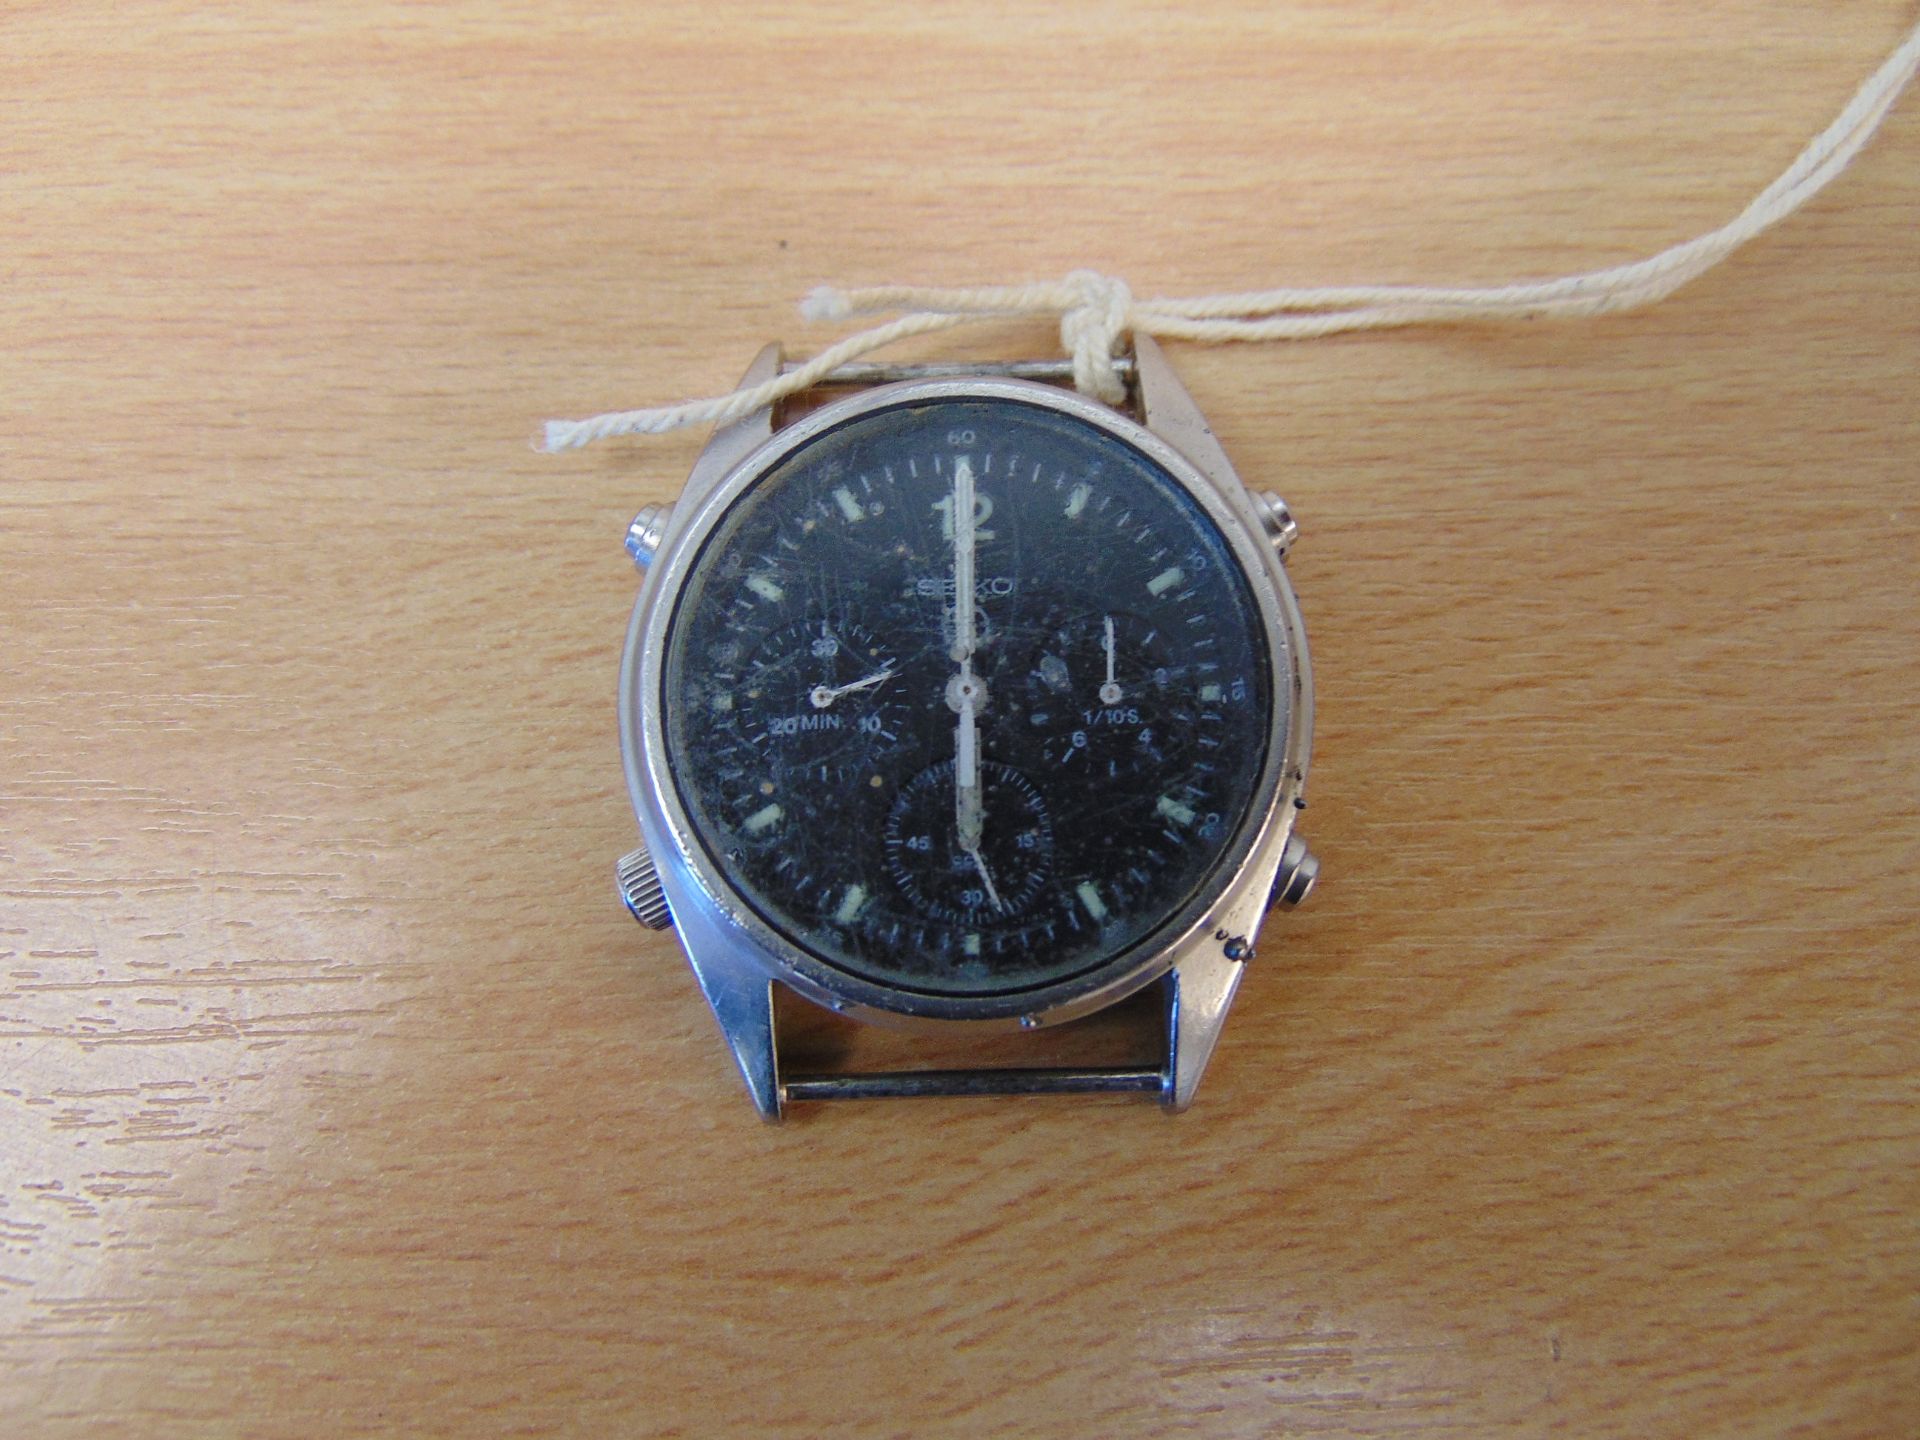 Seiko Gen 1 Pilots Chrono RAF Harrier Force Issue Nato Marks Date 1984 - Image 2 of 4